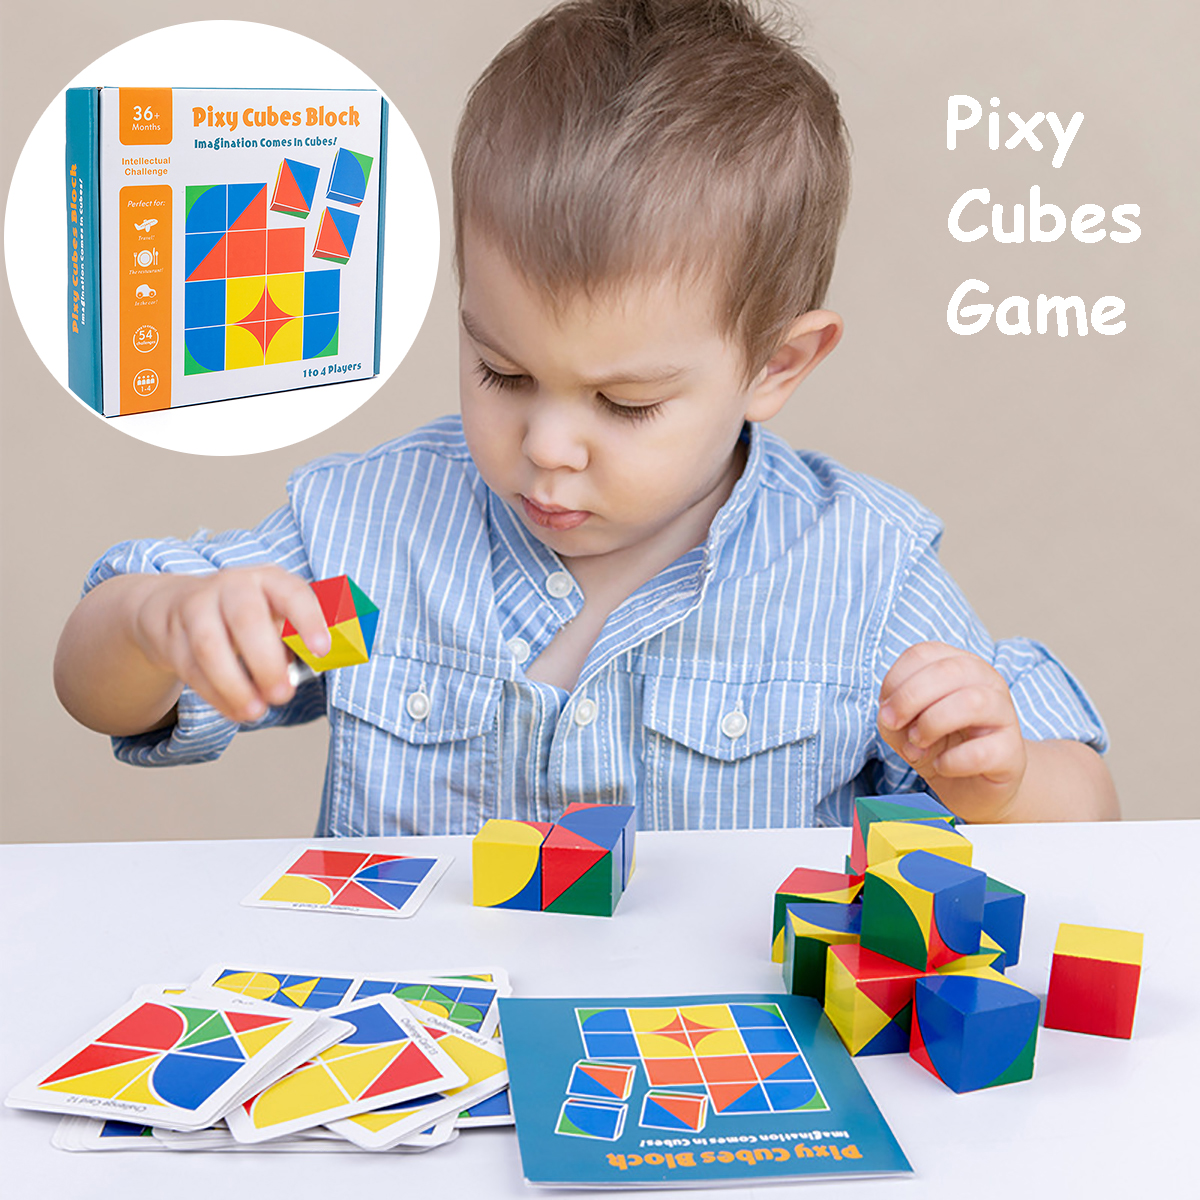 Kids-Child-Early-Education-Enlightenment-Teaching-Learning-Puzzle-Toys-Gift-1666487-1